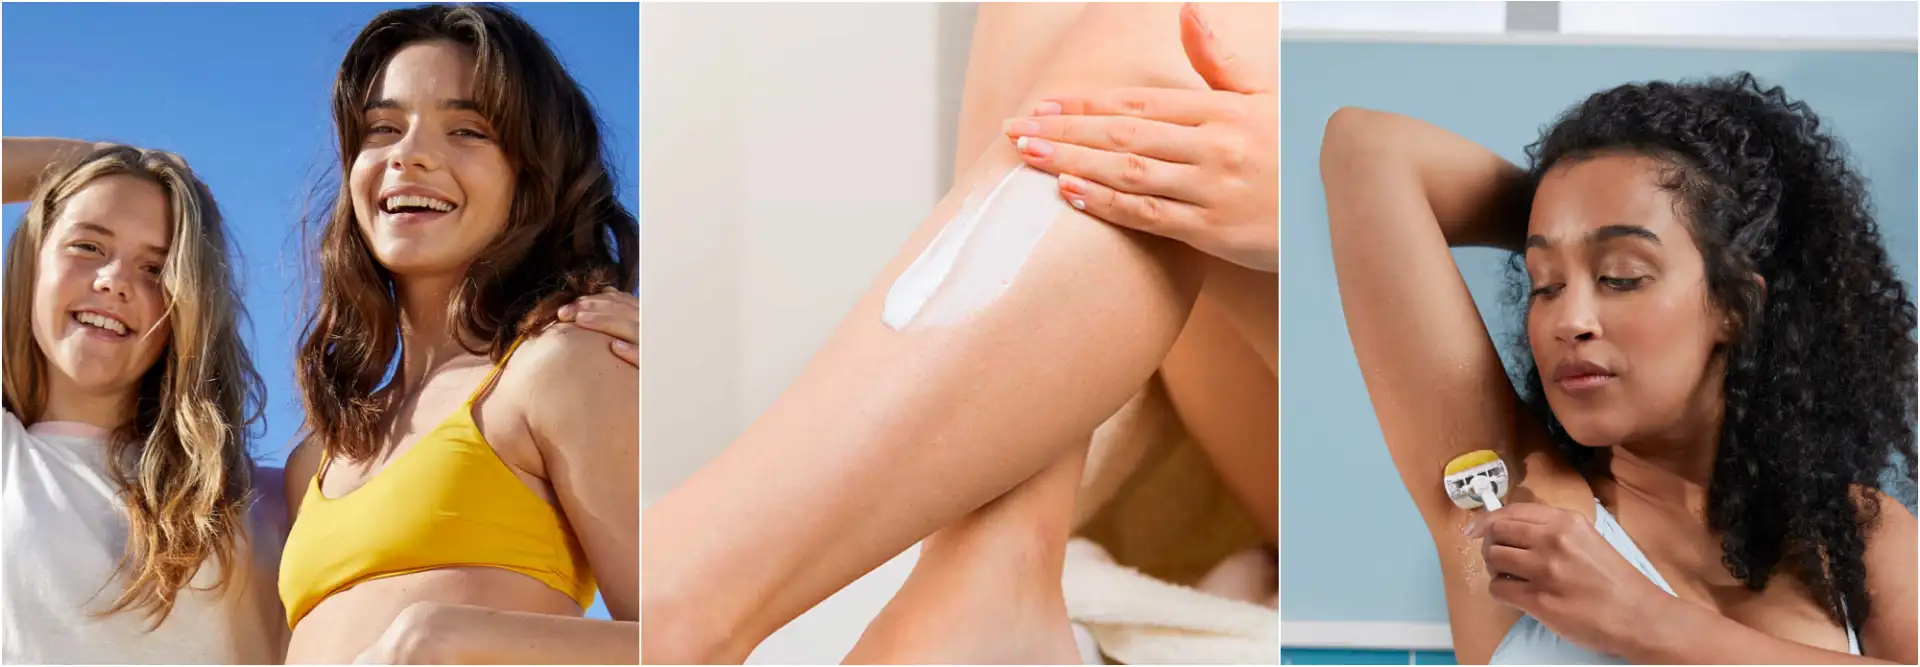 Collage of a woman smiling, woman putting shave gel on her leg and a woman shaving her underarm